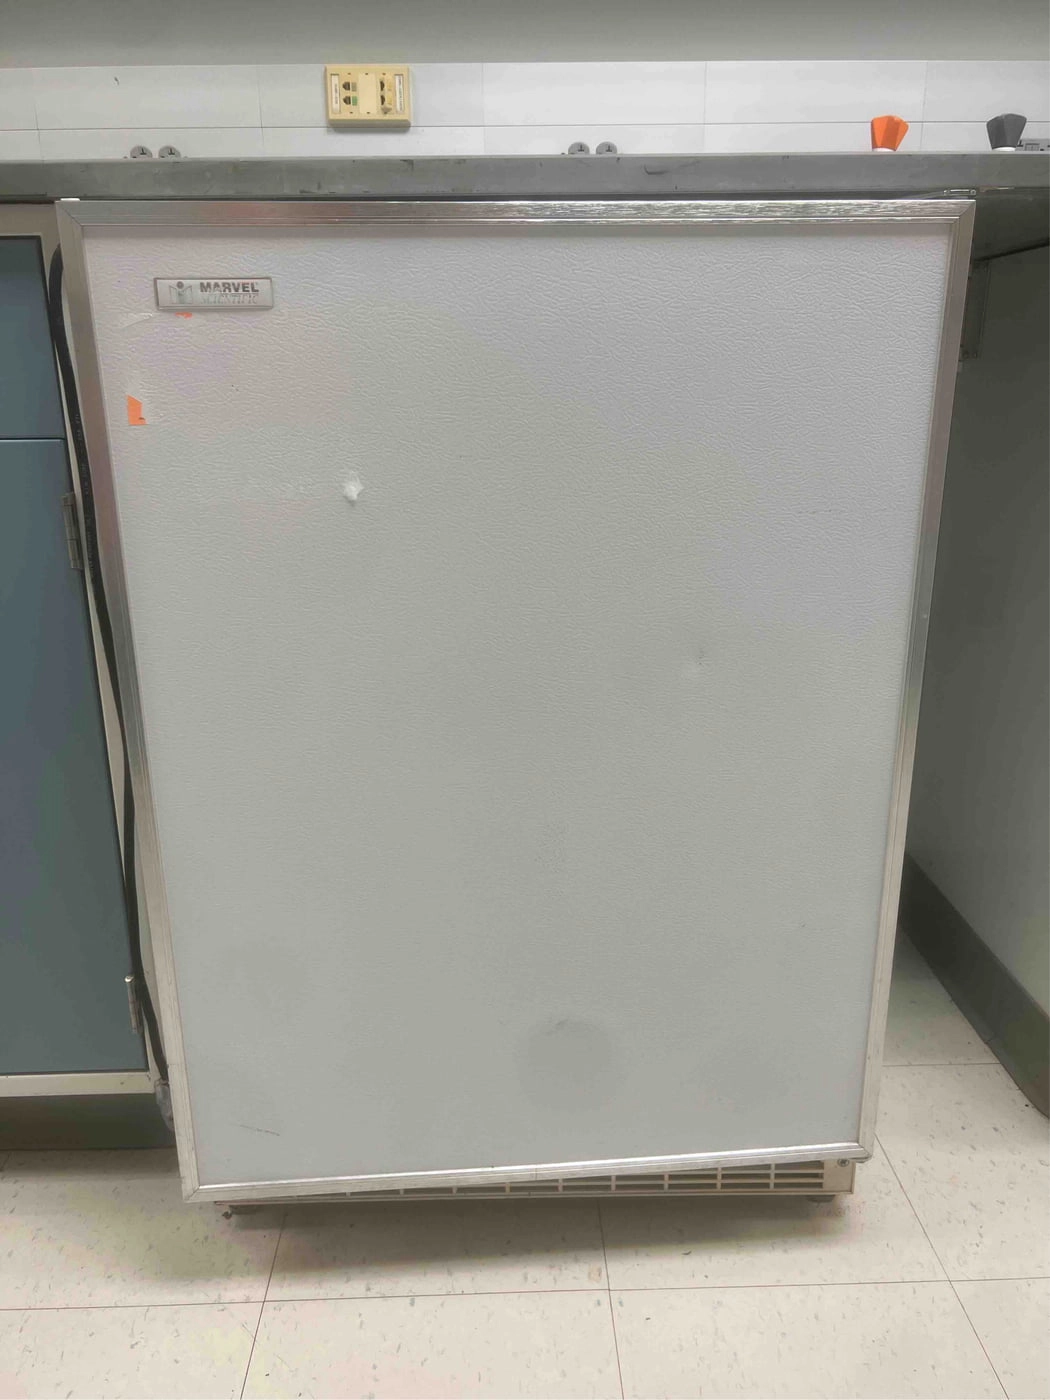 Used Freezer Marvel Undercounter 4CAF R-134A 115V 4.5 CuFt TESTED (5367AA)